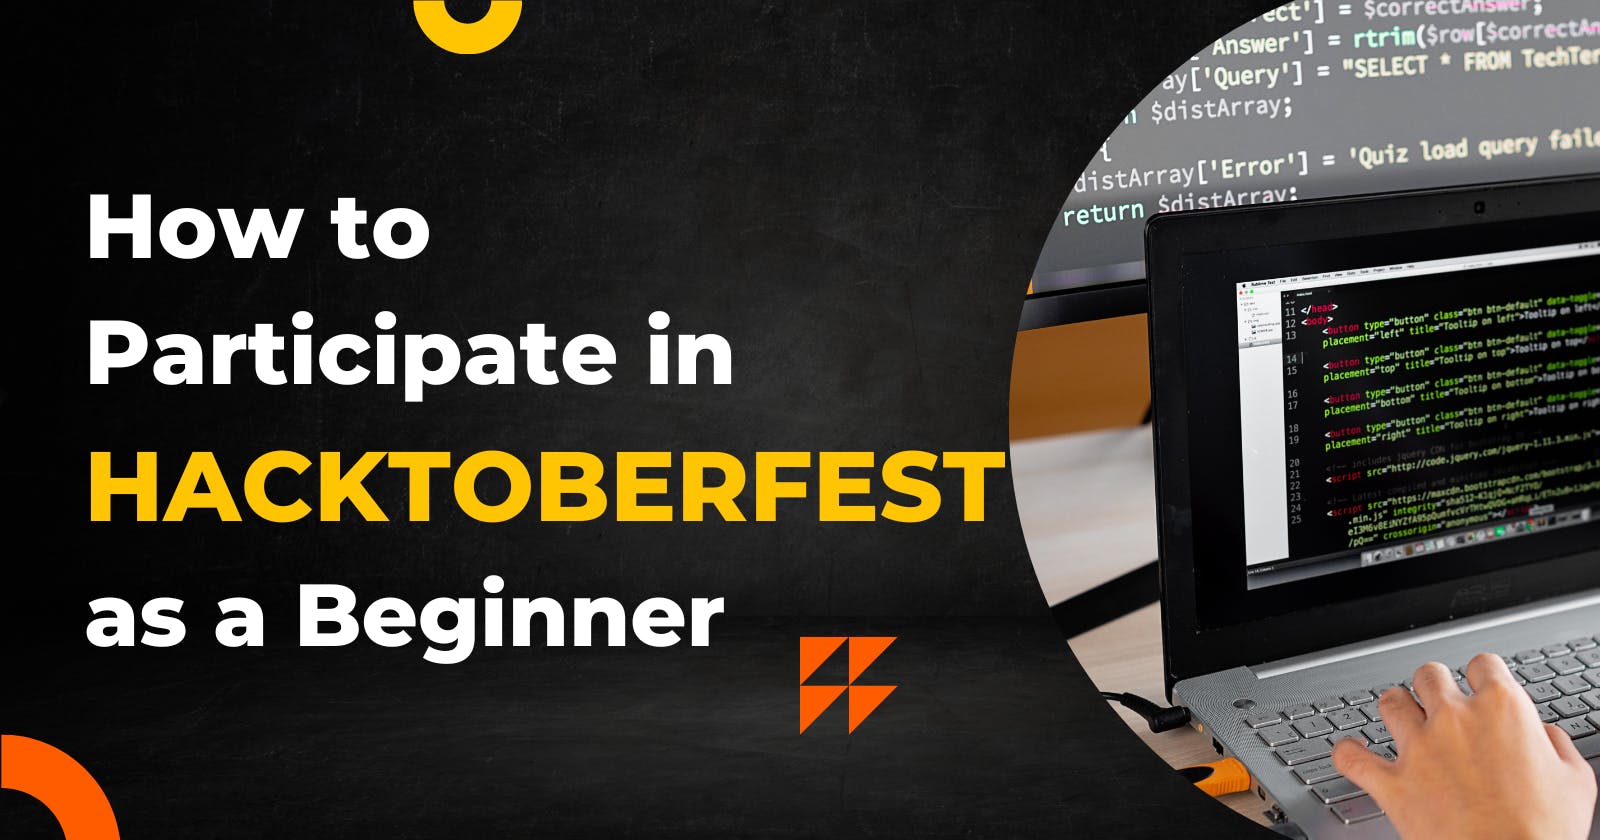 How to Participate in Hactoberfest as a Beginner